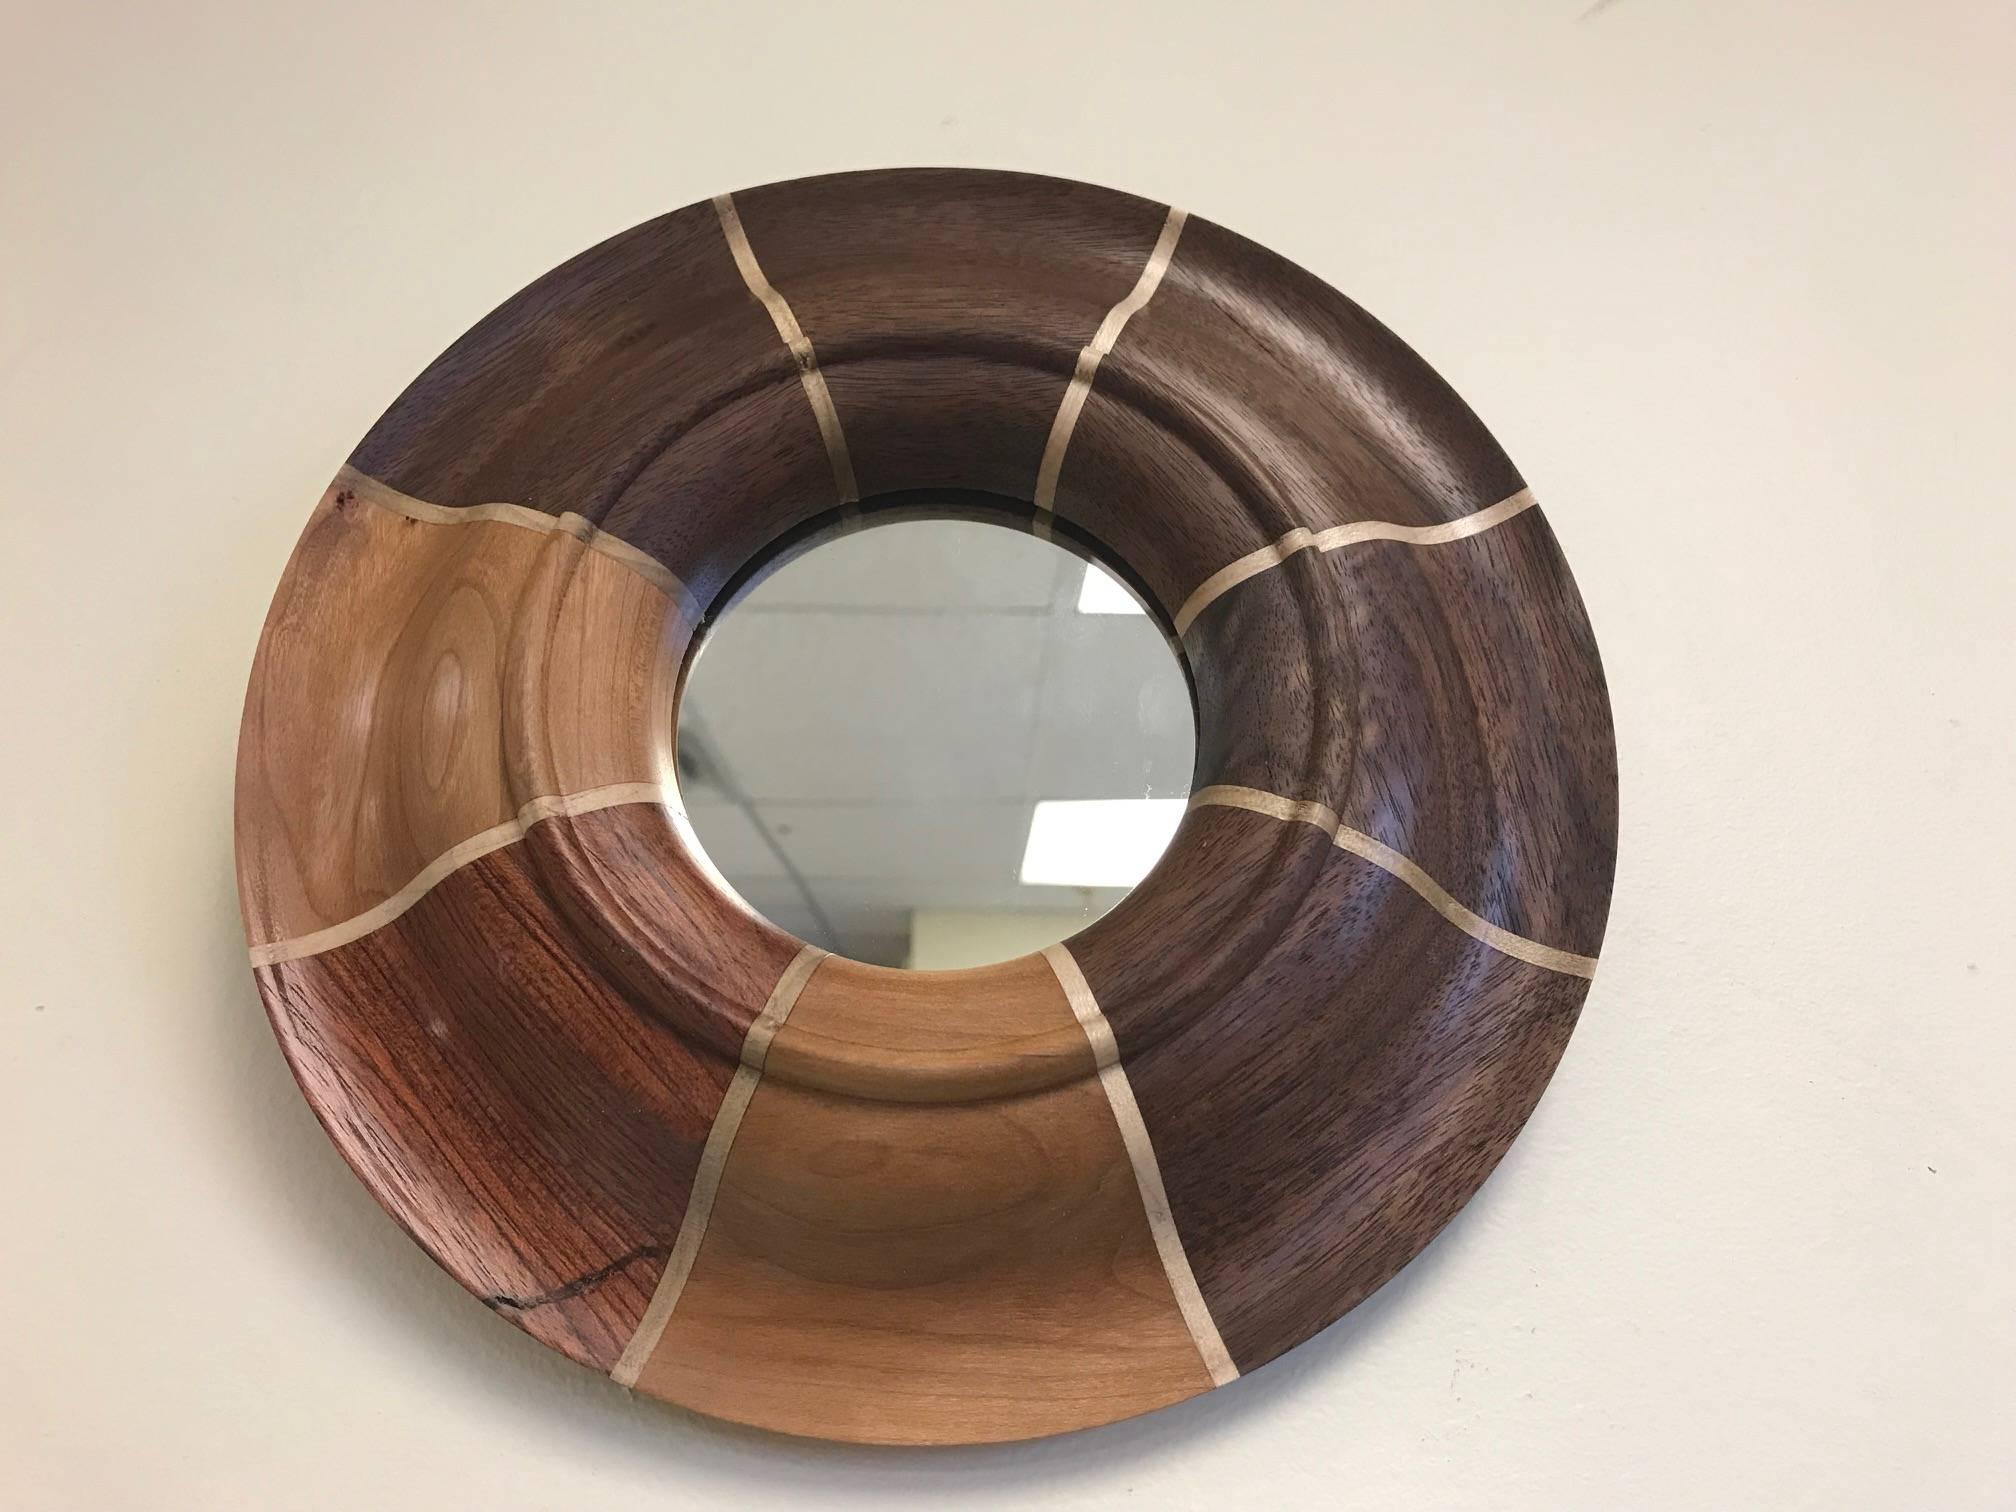 Small custom walnut and maple inlay mirror.
The mirror listed is currently available.